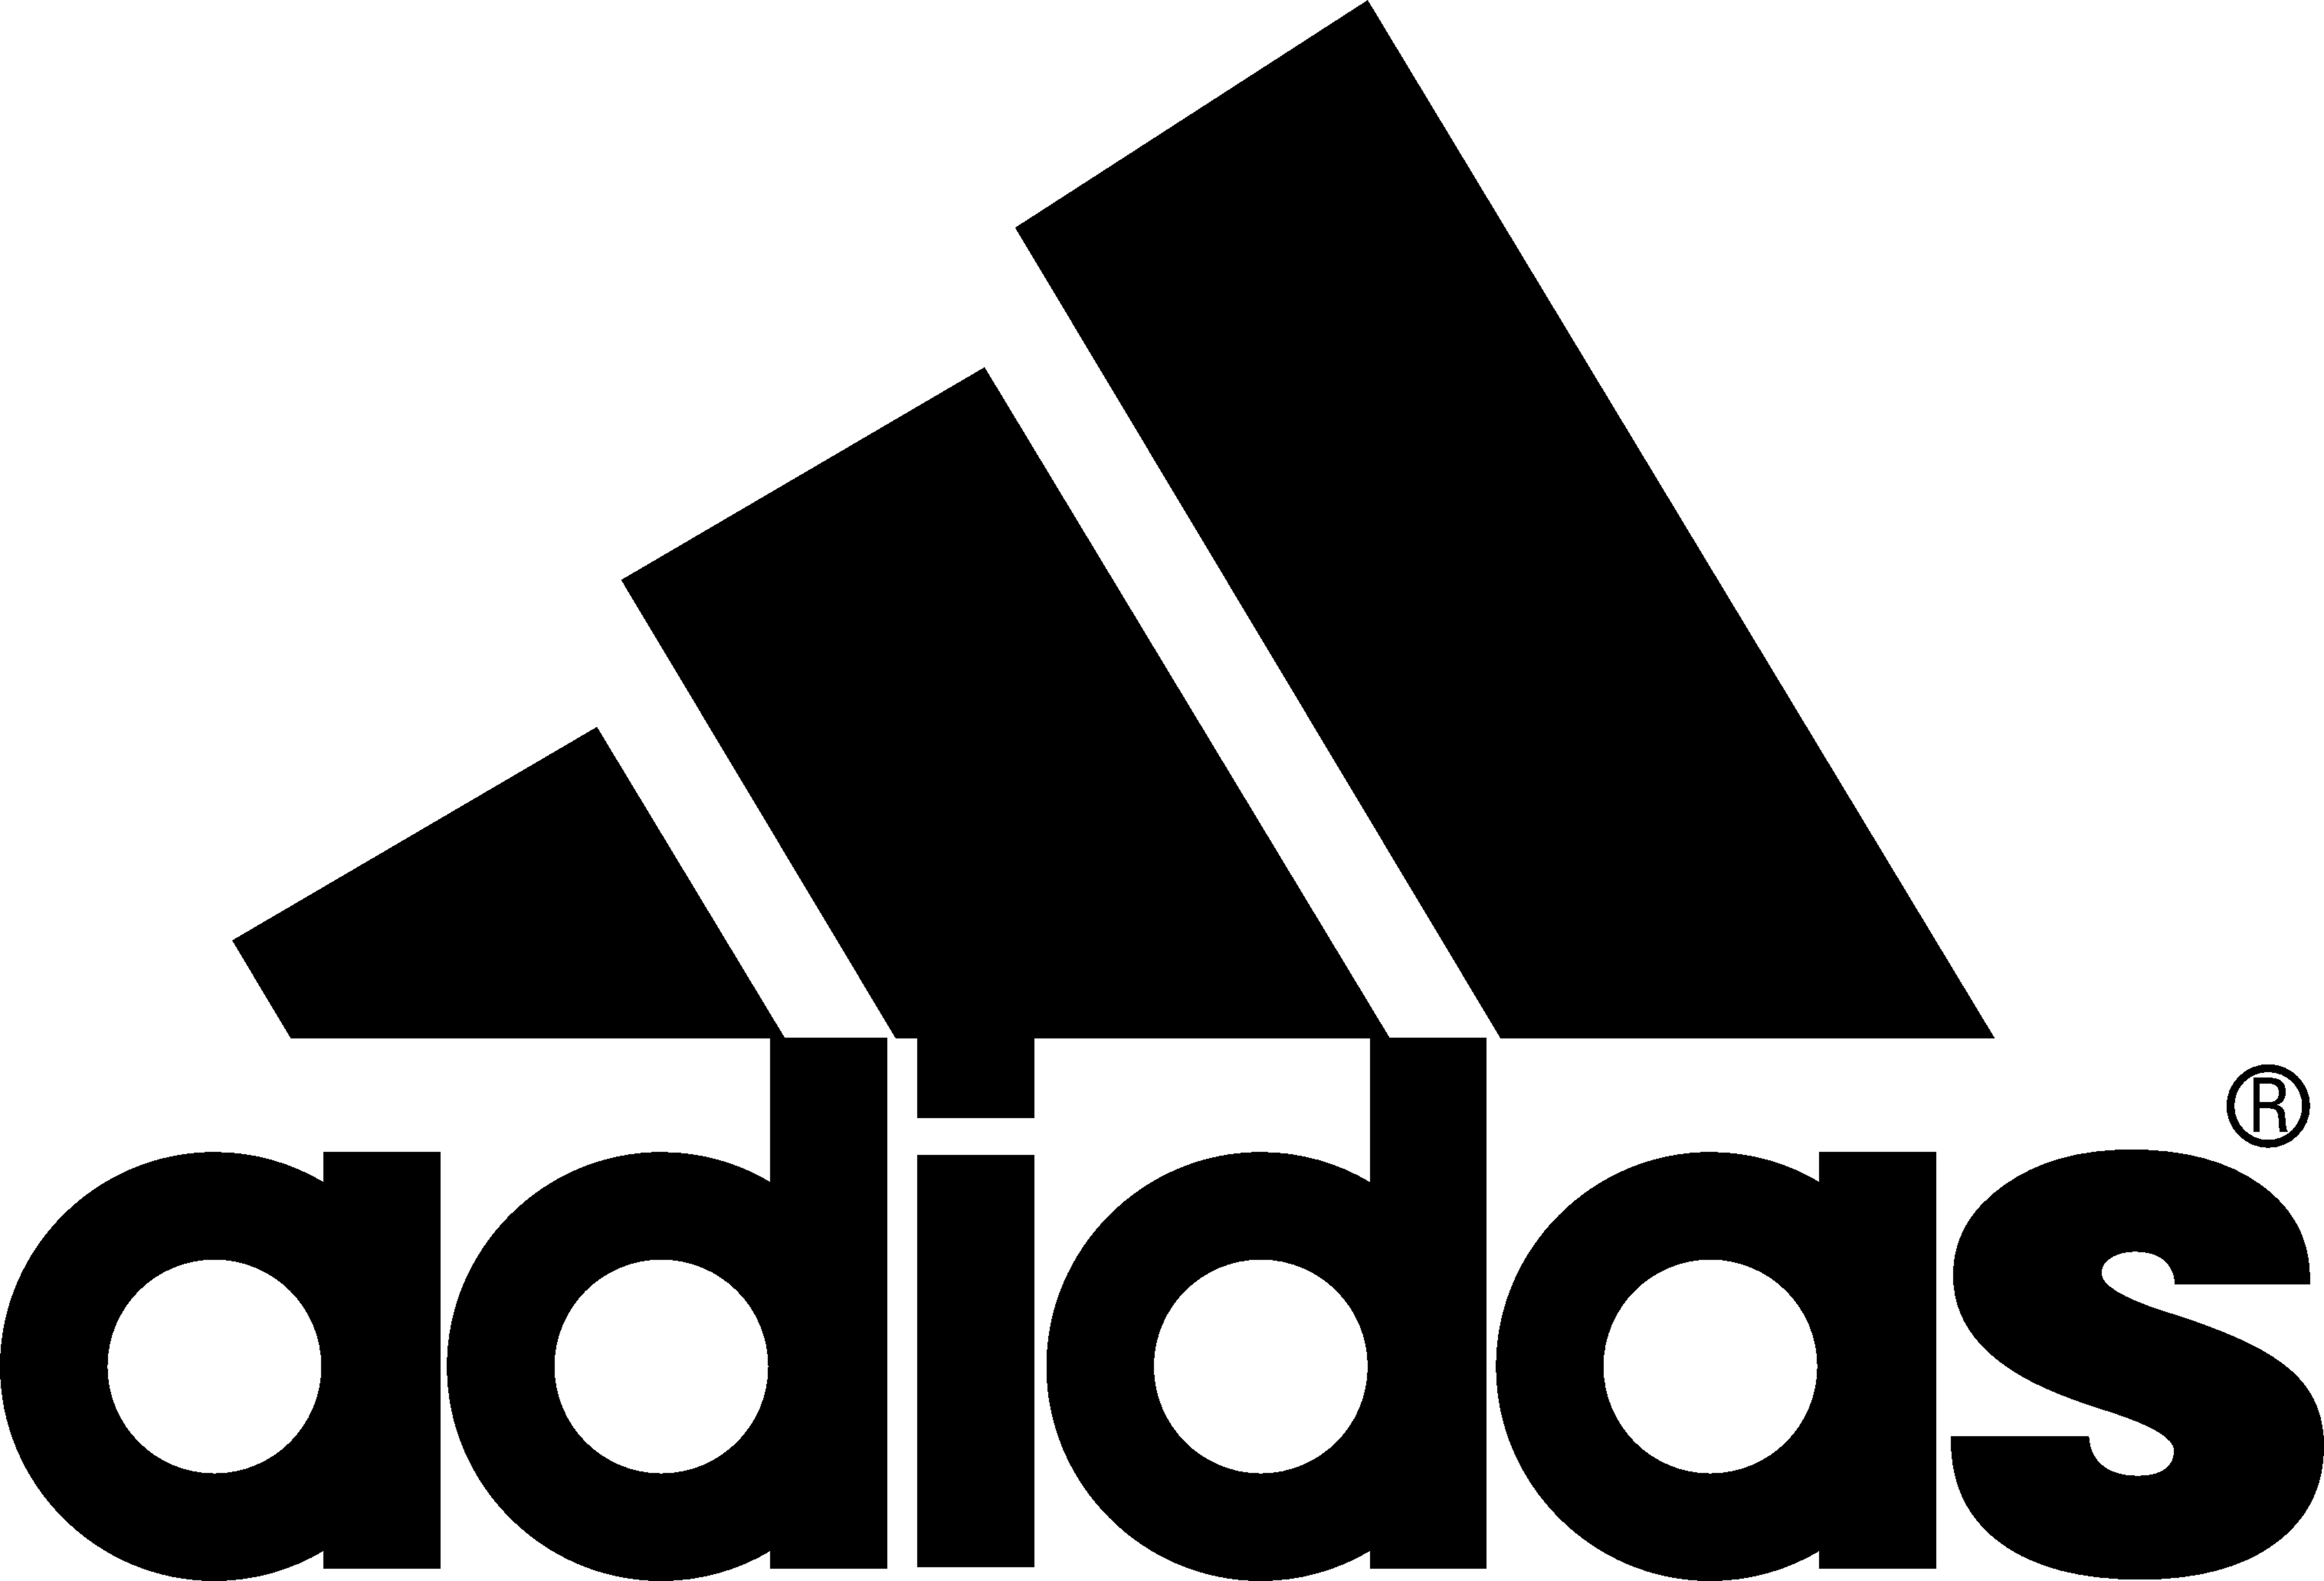 adidas logo vector png 19 free Cliparts | Download images on Clipground